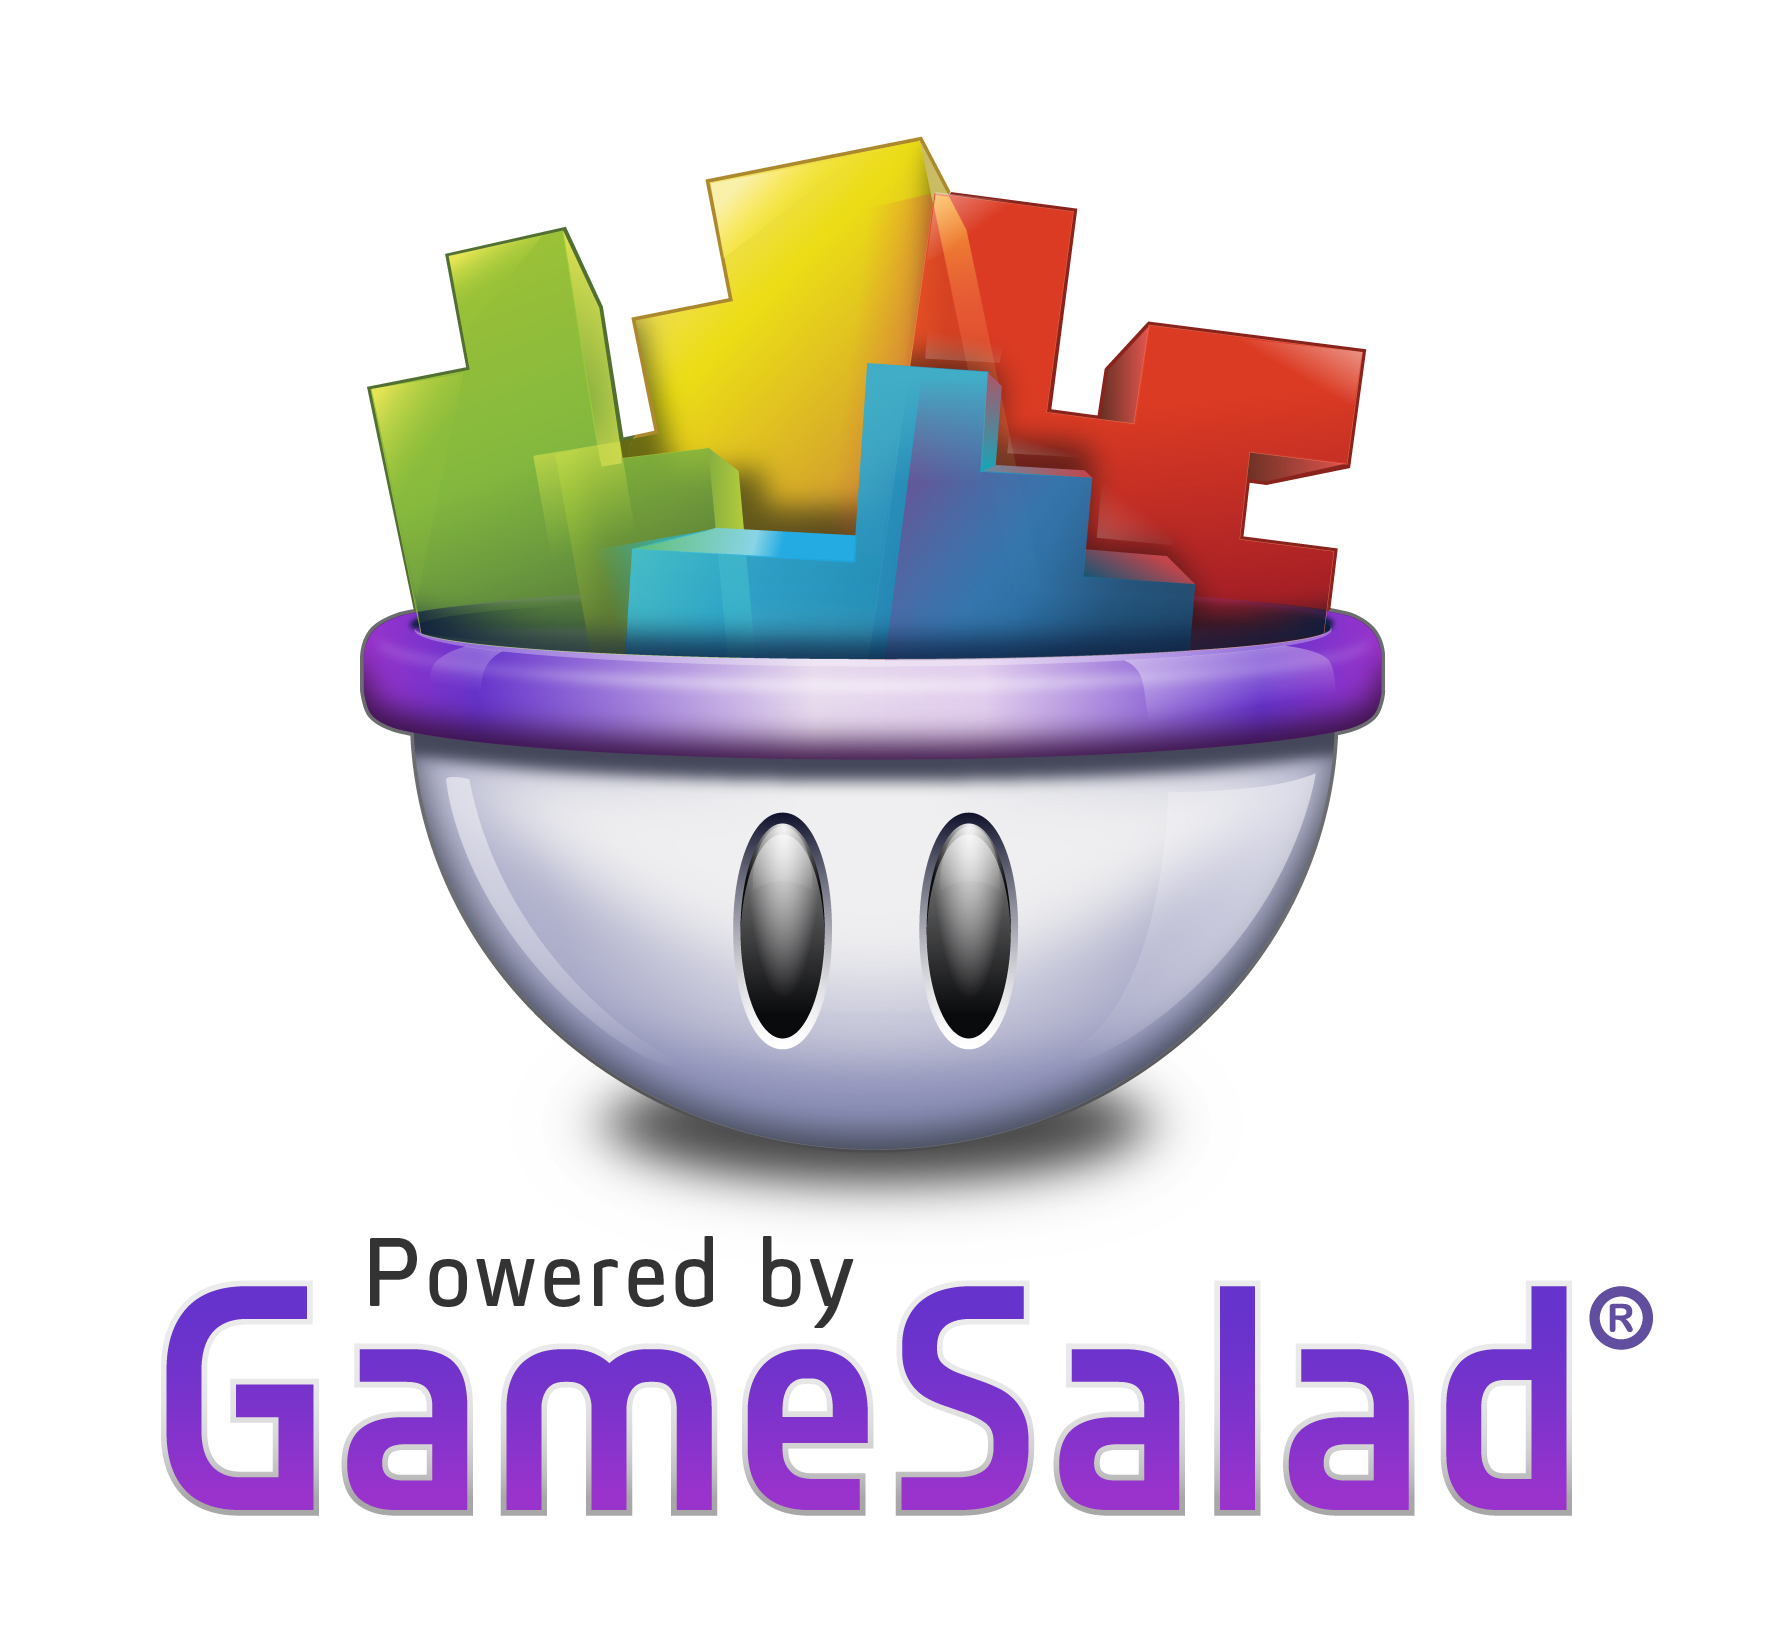 gamesalad games for windows